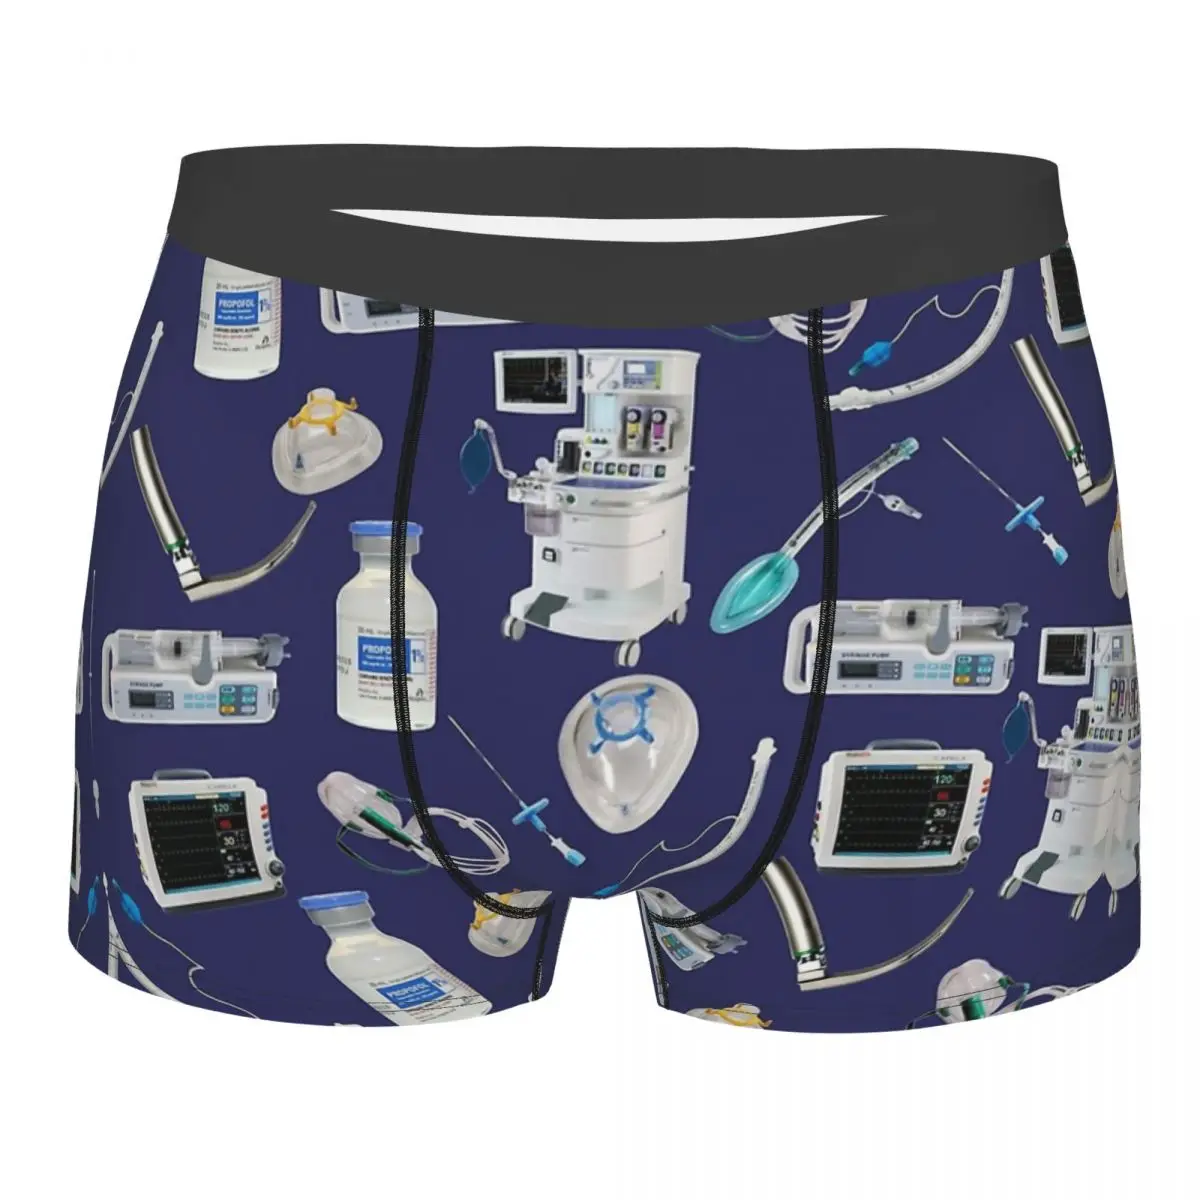 Tools Of The Trade SPACE BLUE Anesthesia Doctor 1 Men Boxer Briefs Underwear Highly Breathable Top Quality Birthday Gifts funny men s medical nurse anesthesia labels men s briefs highly breathable underwear top quality print shorts birthday gifts